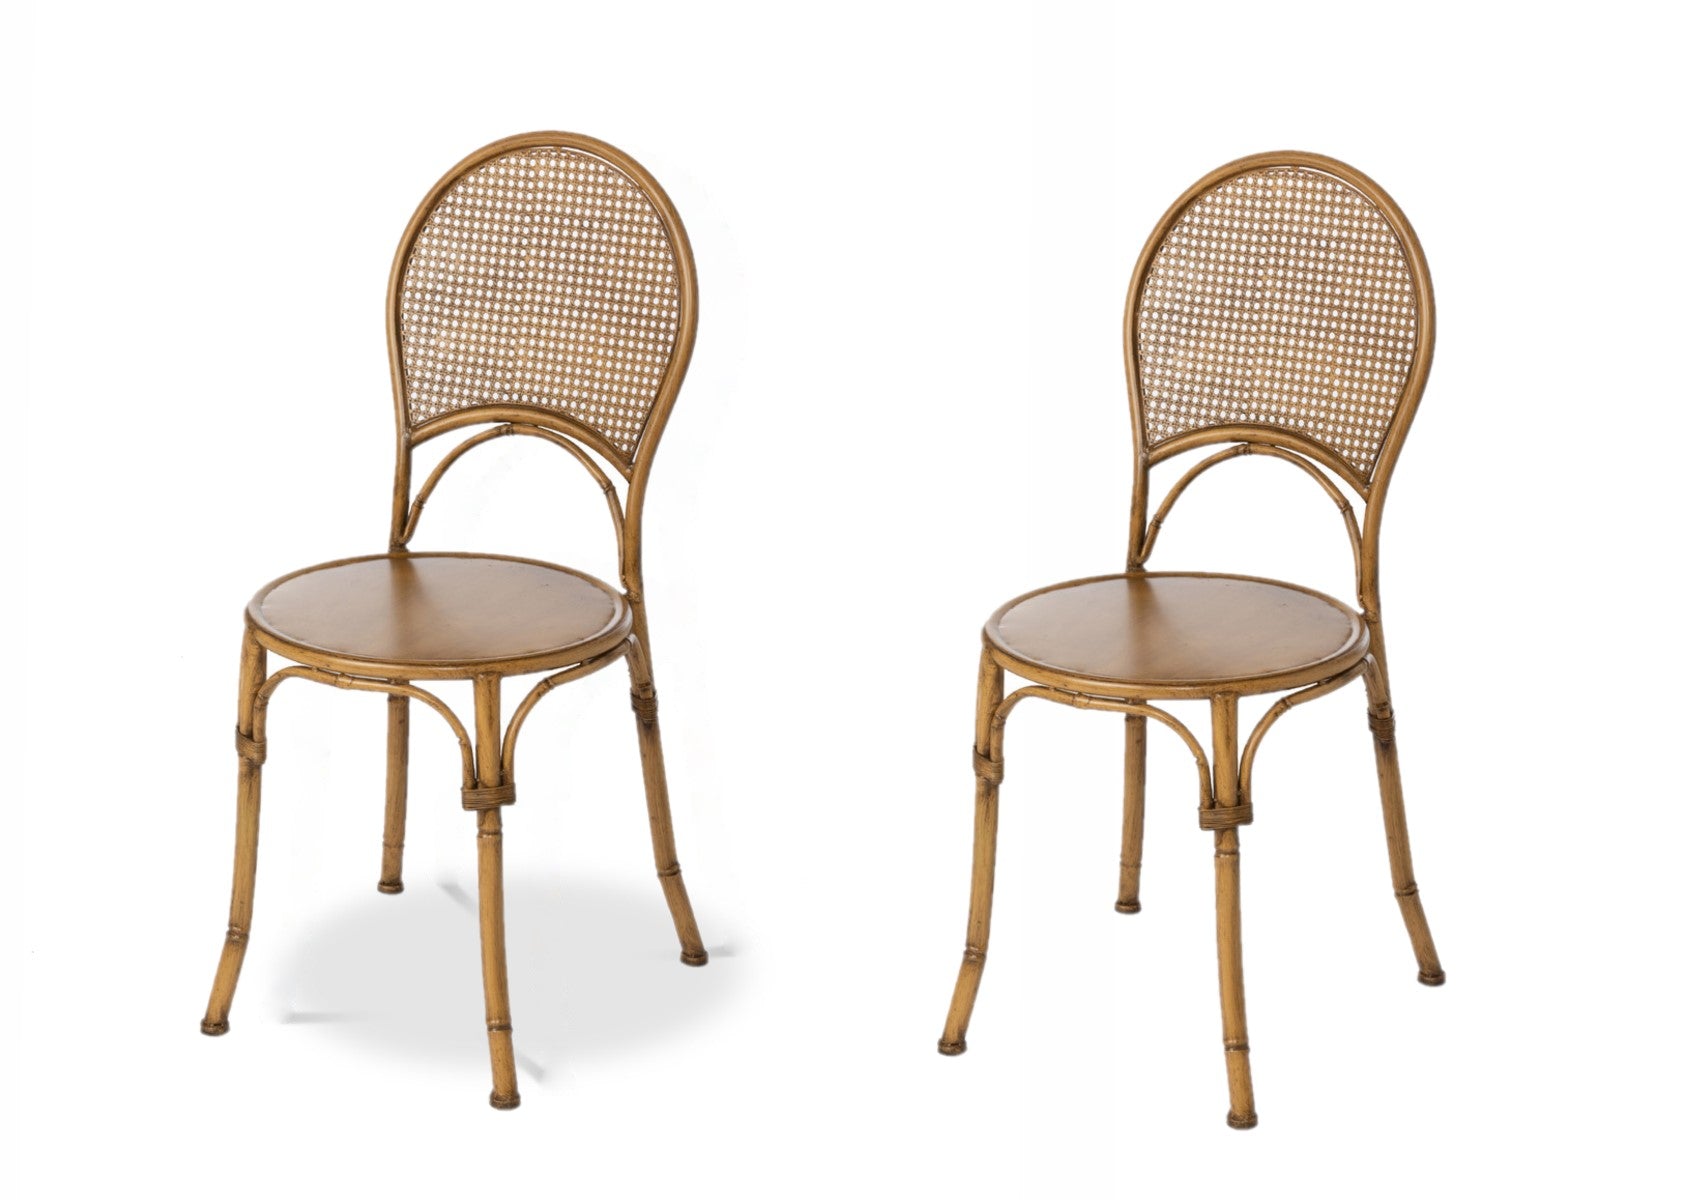 Roanoke King Louis Dining Chairs - Handcrafted